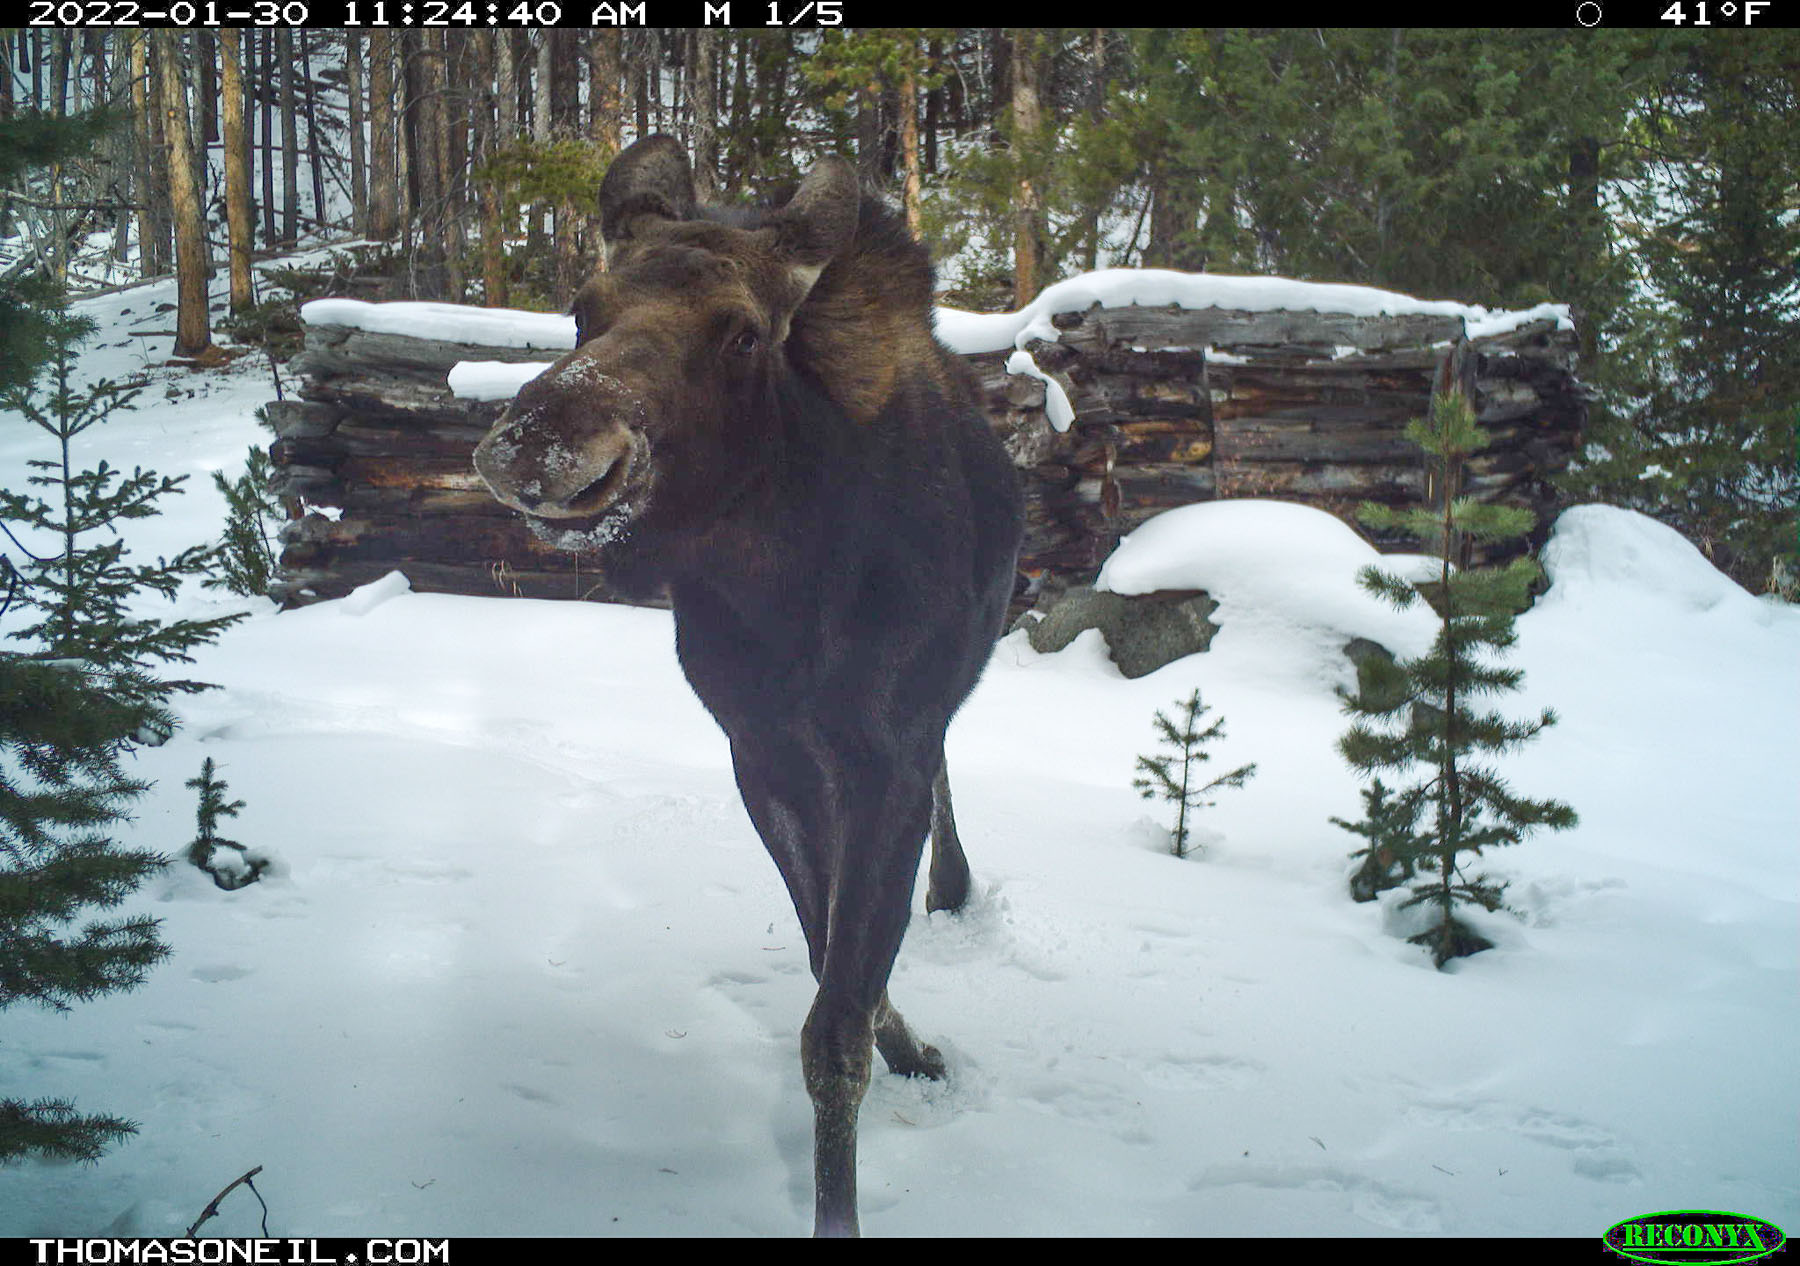 Moose on trailcam, Red Lodge, MT, January 2022.  Click for next photo.